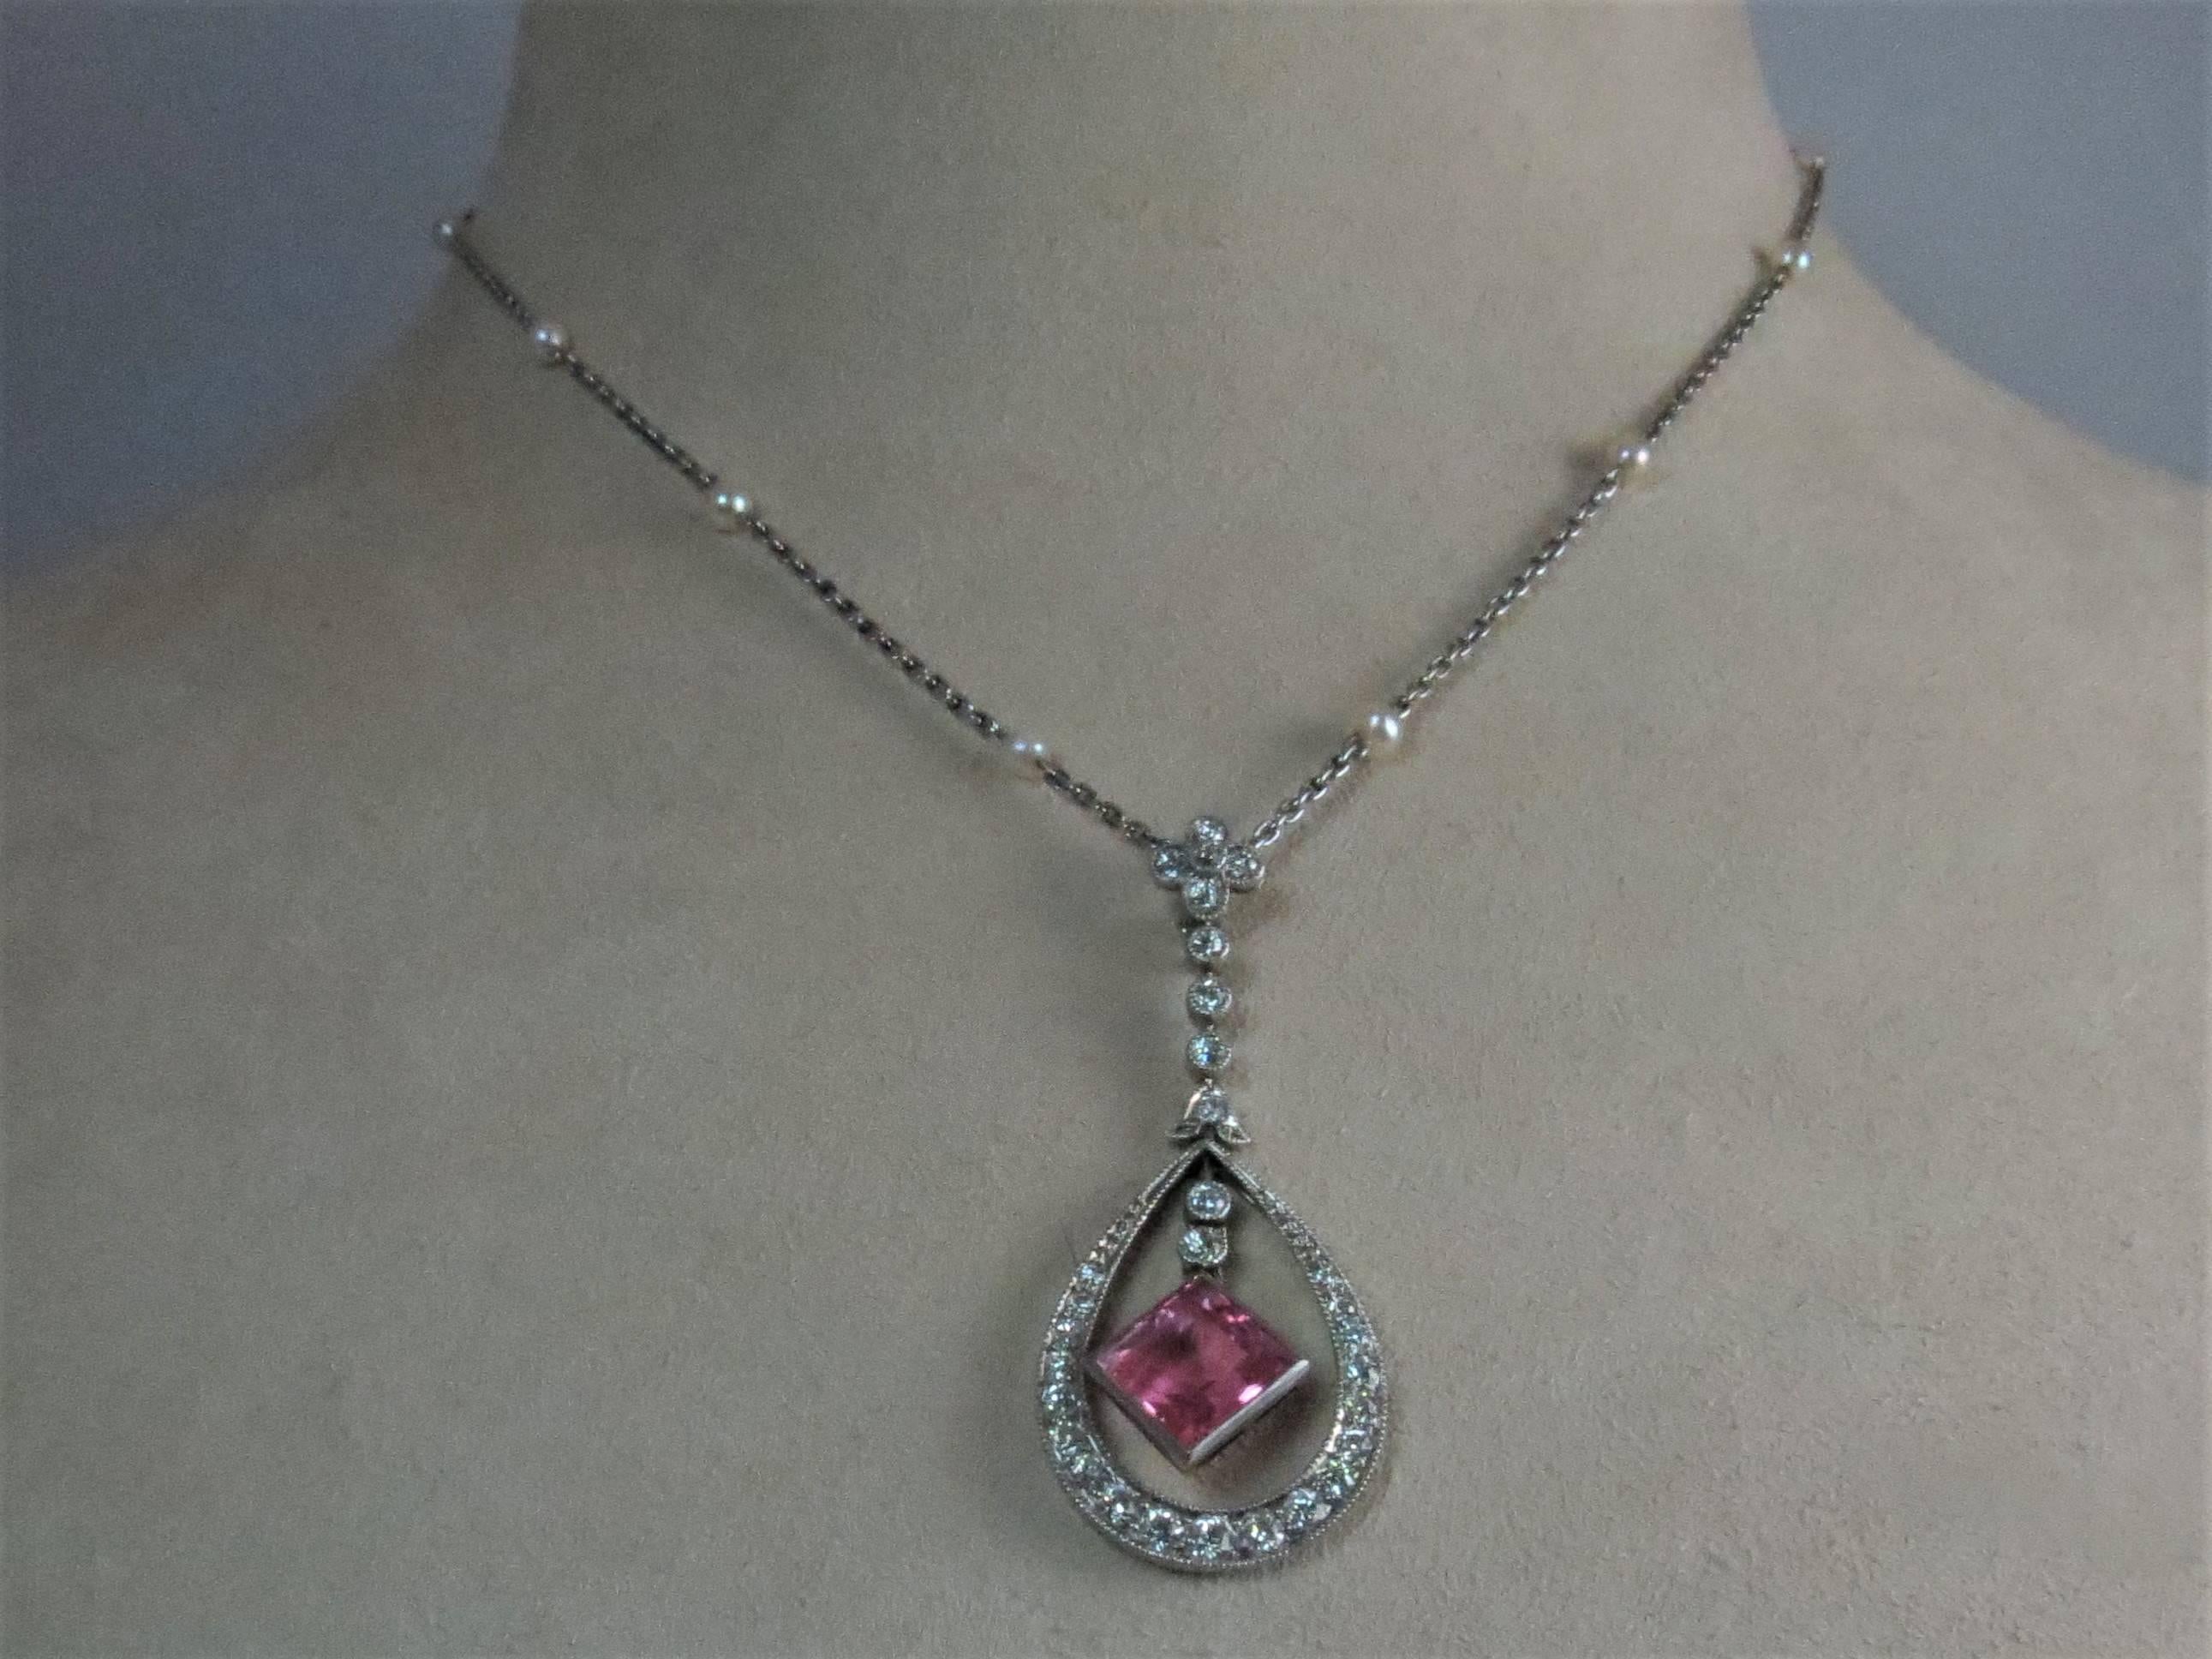 18K white gold pear shape pendant, bead set with 30 old  European cut diamonds weighing approximately 1ct, H-I color, VS-SI clarity and one bezel set square pink tourmaline weighing approximately 3cts suspended from 16 inch white gold chain with